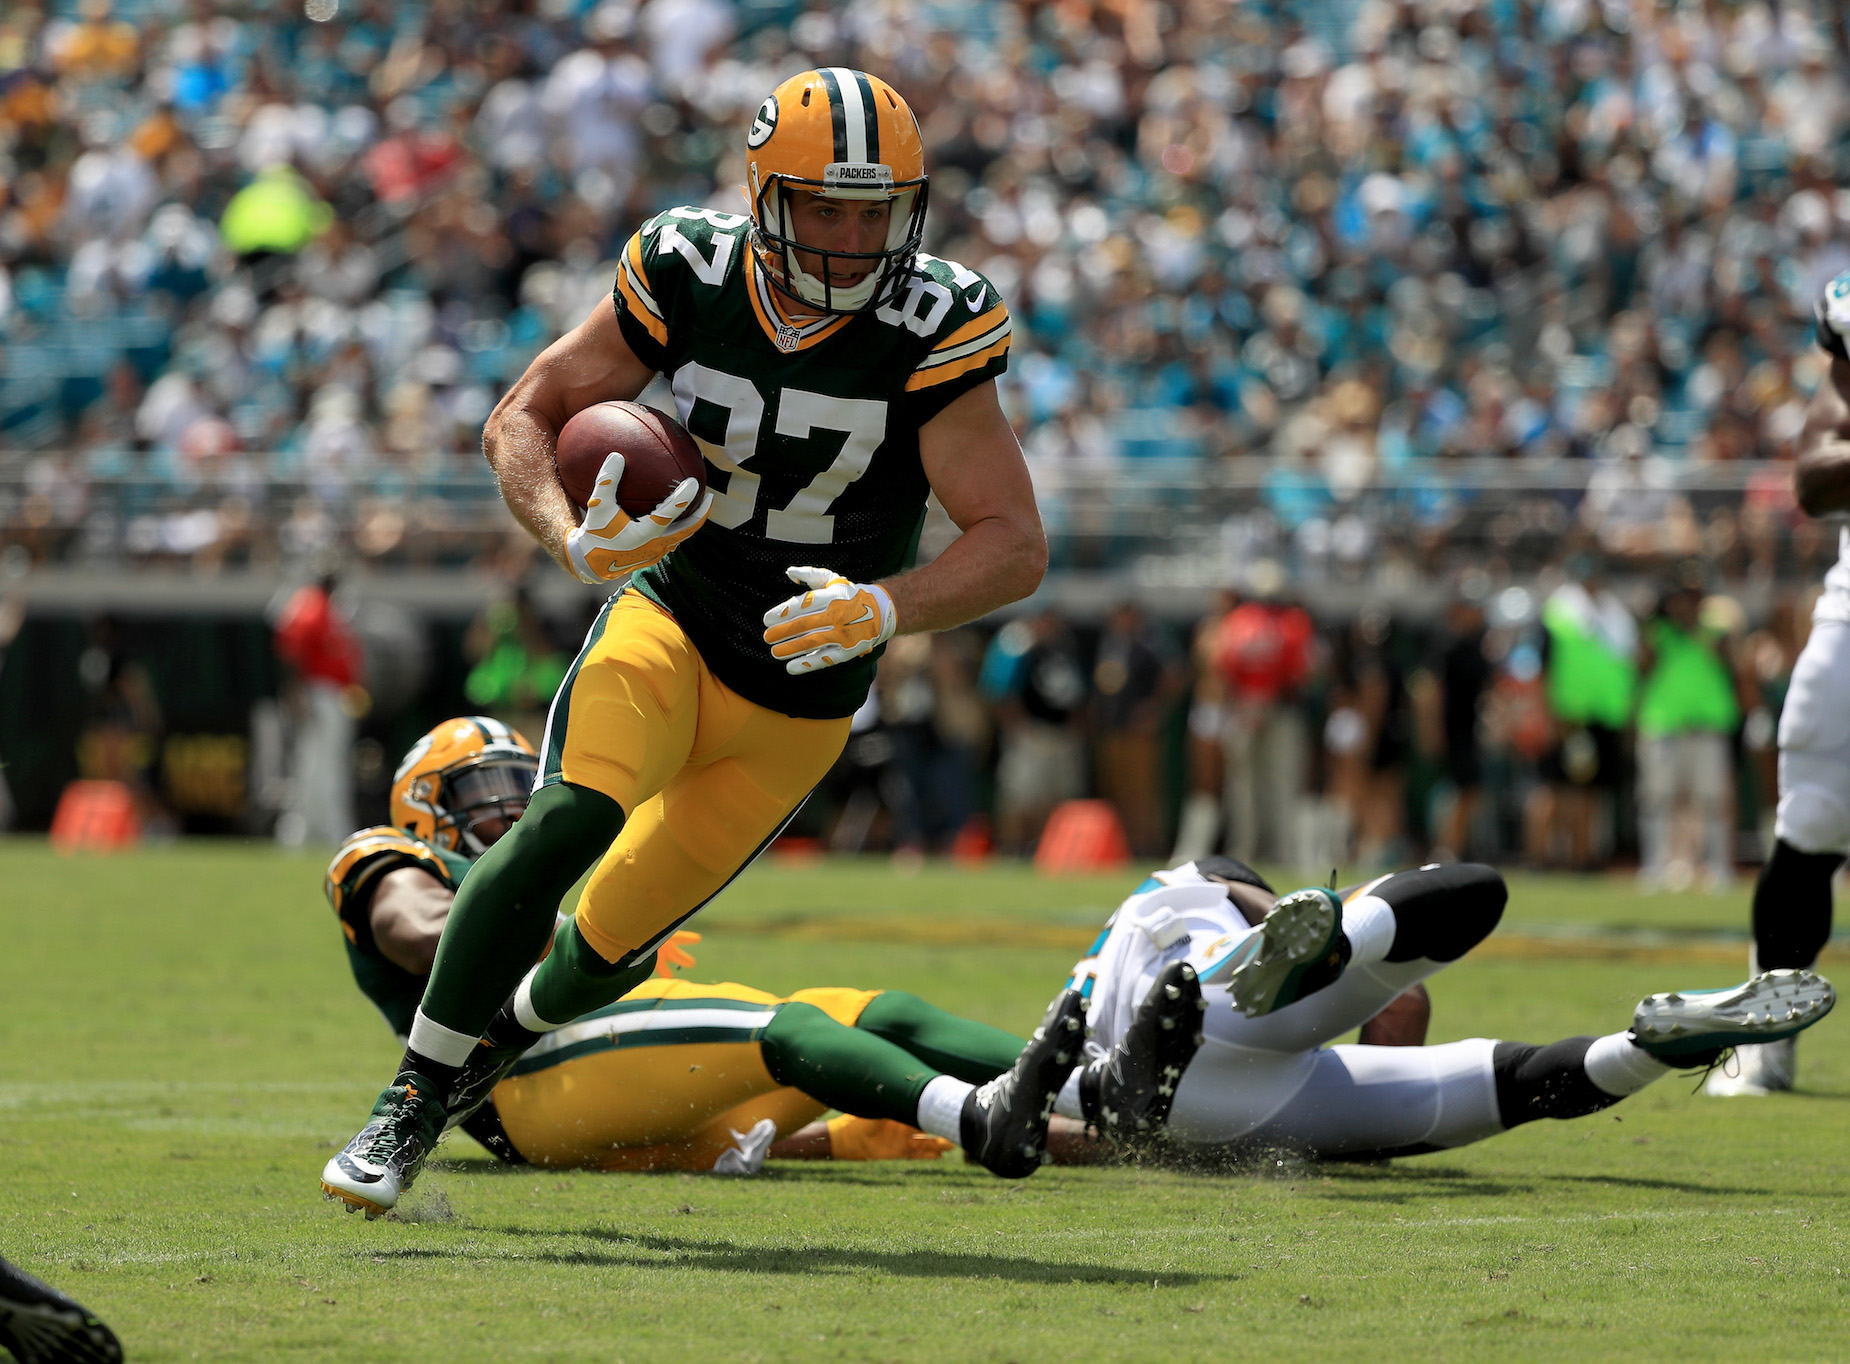 Jordy Nelson remained 'cheap' even after making millions playing pro football.